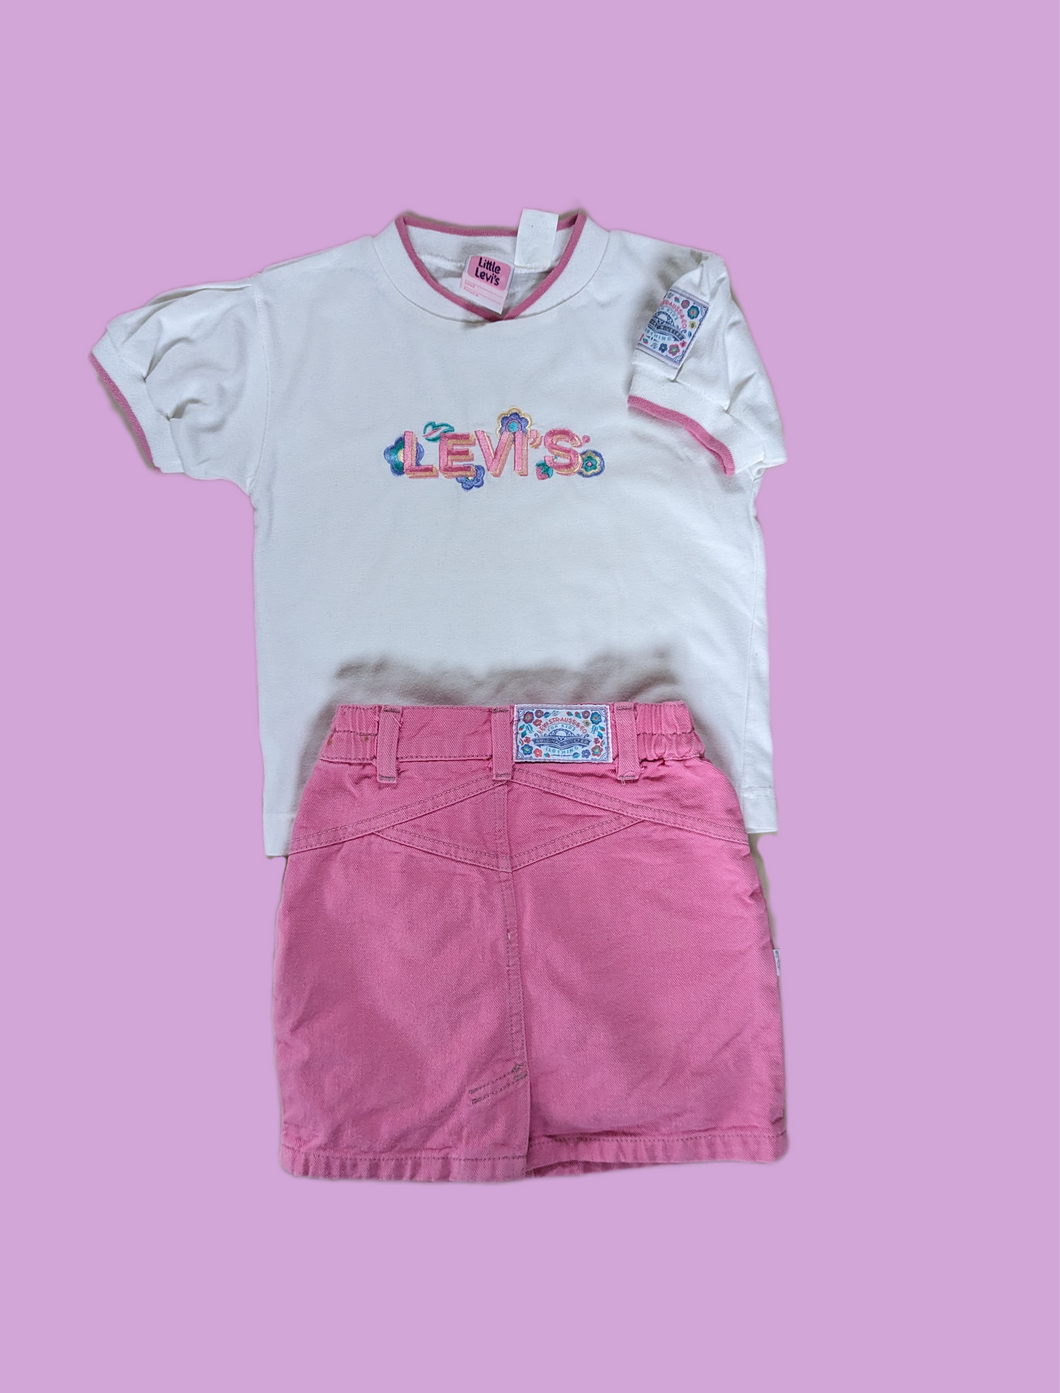 Levi's Pink Skirt + Tee Outfit 4t